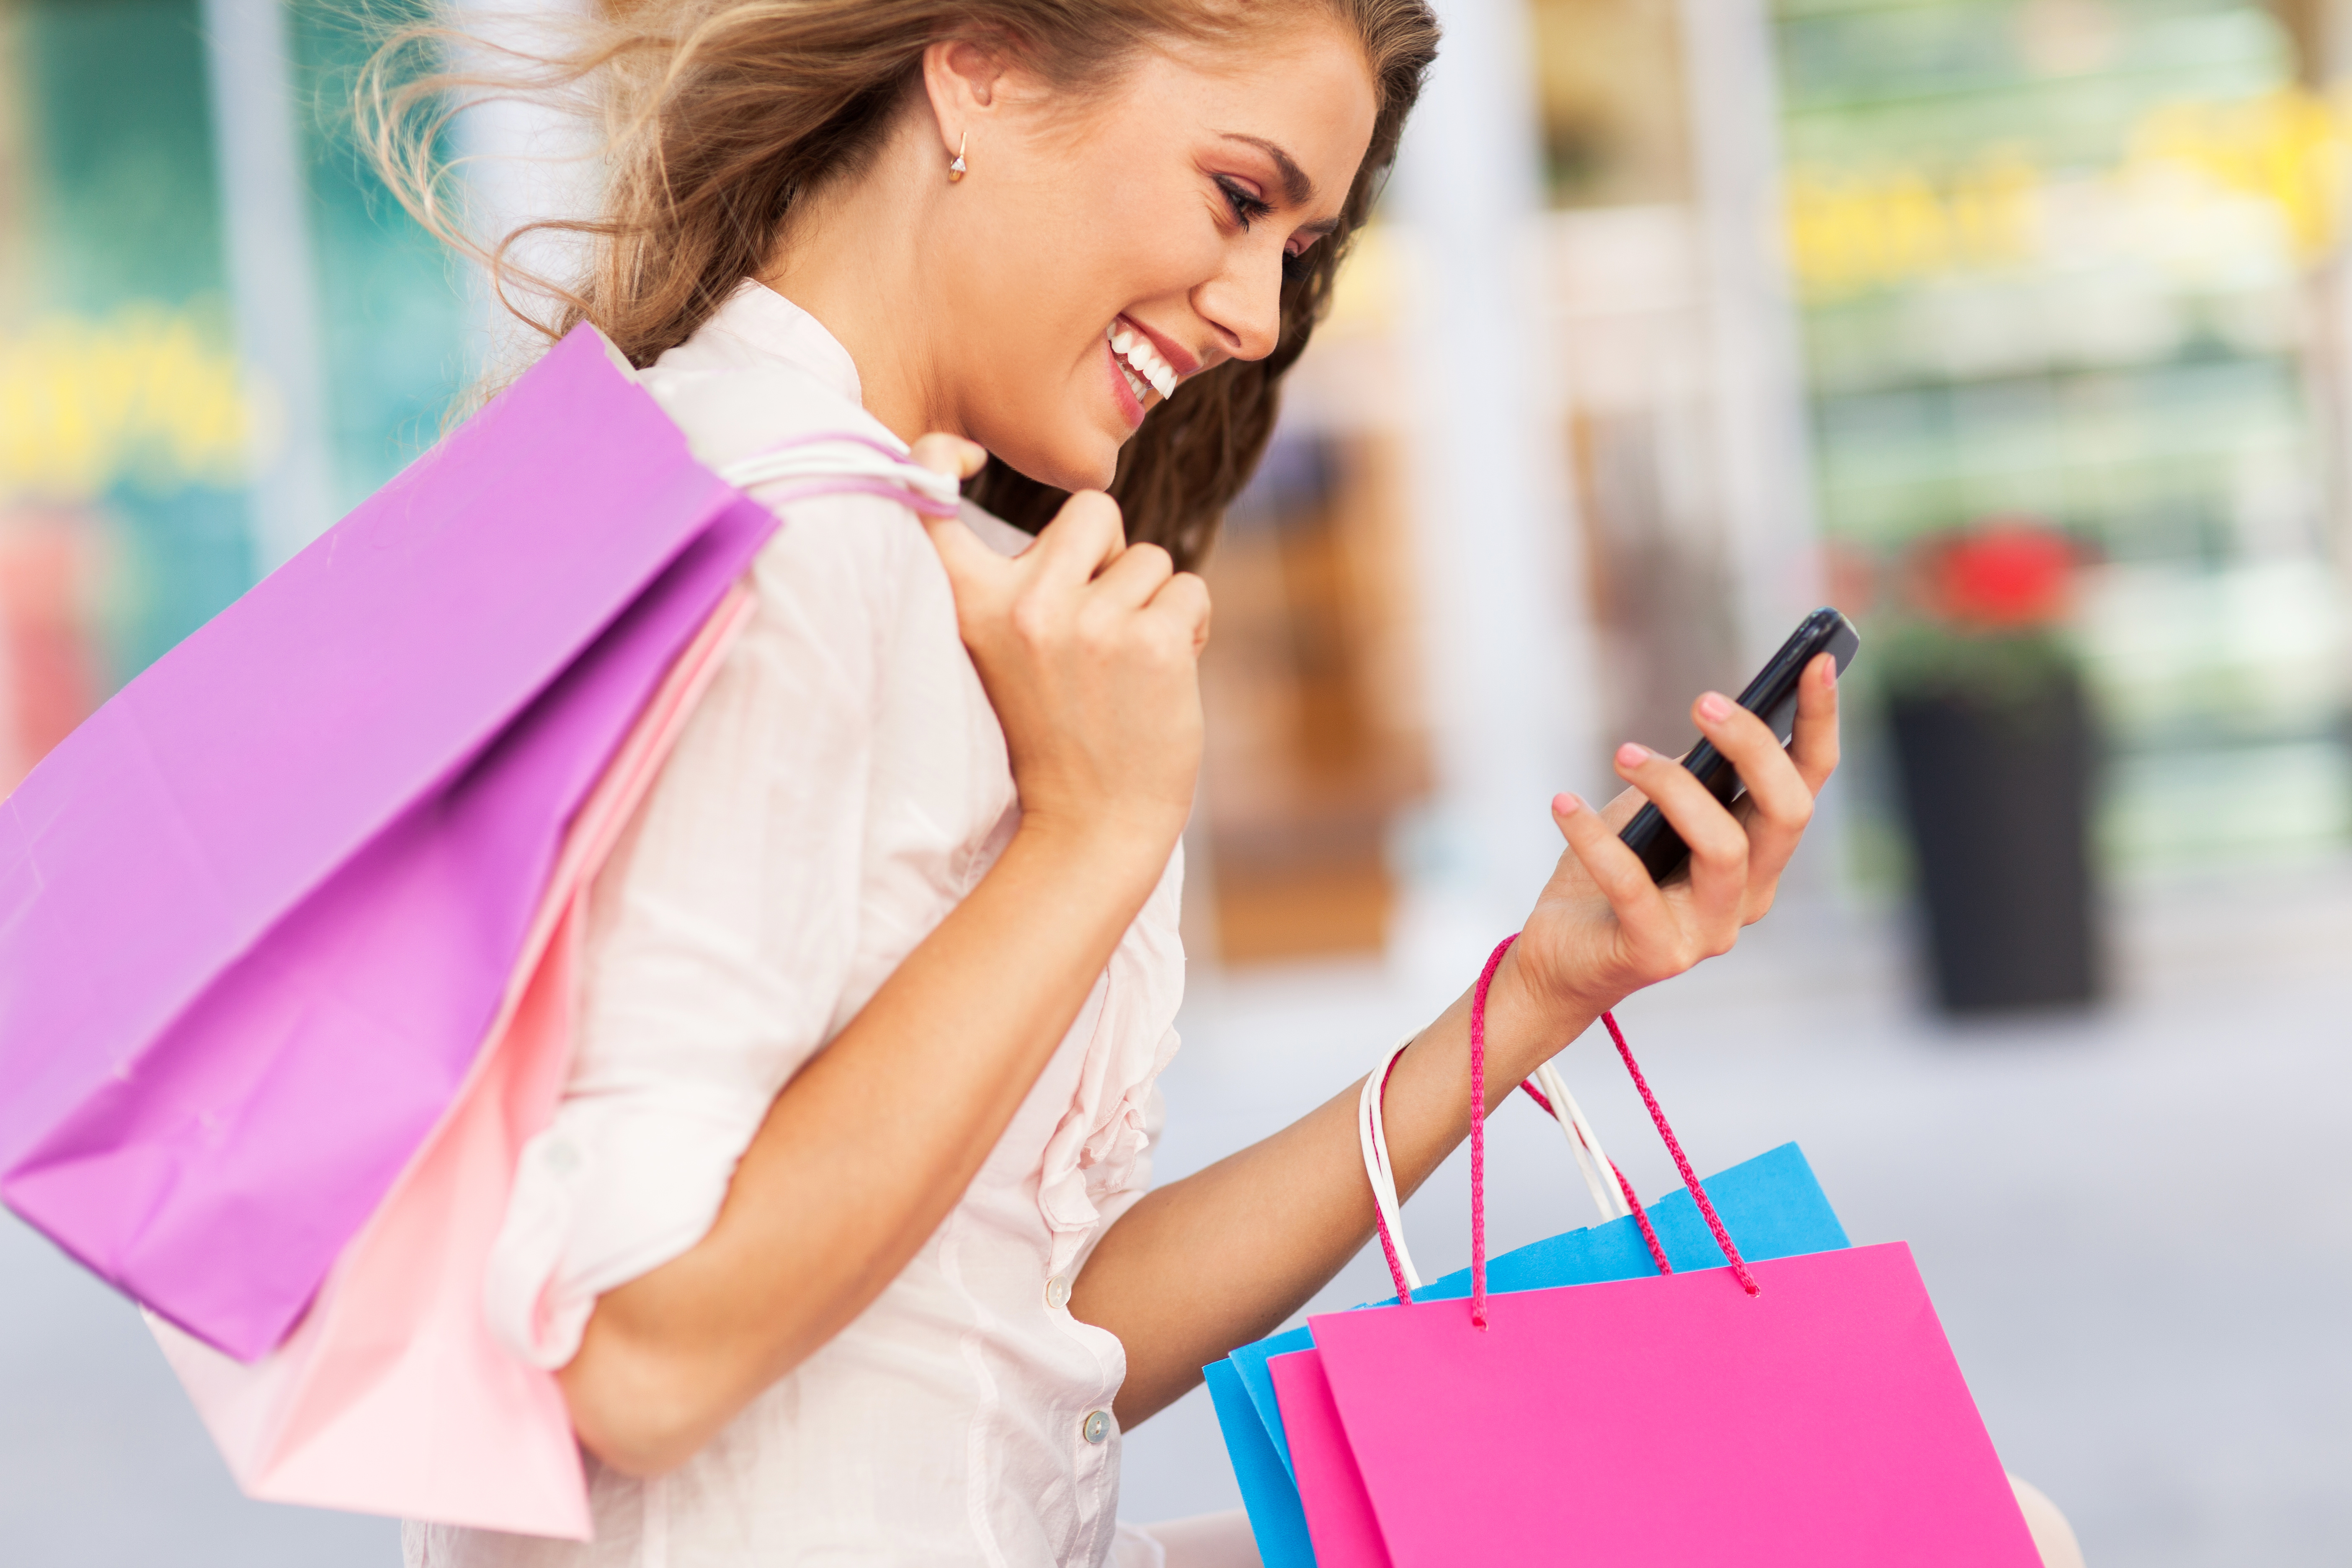 Shopping apps are fun while also saving time and money.